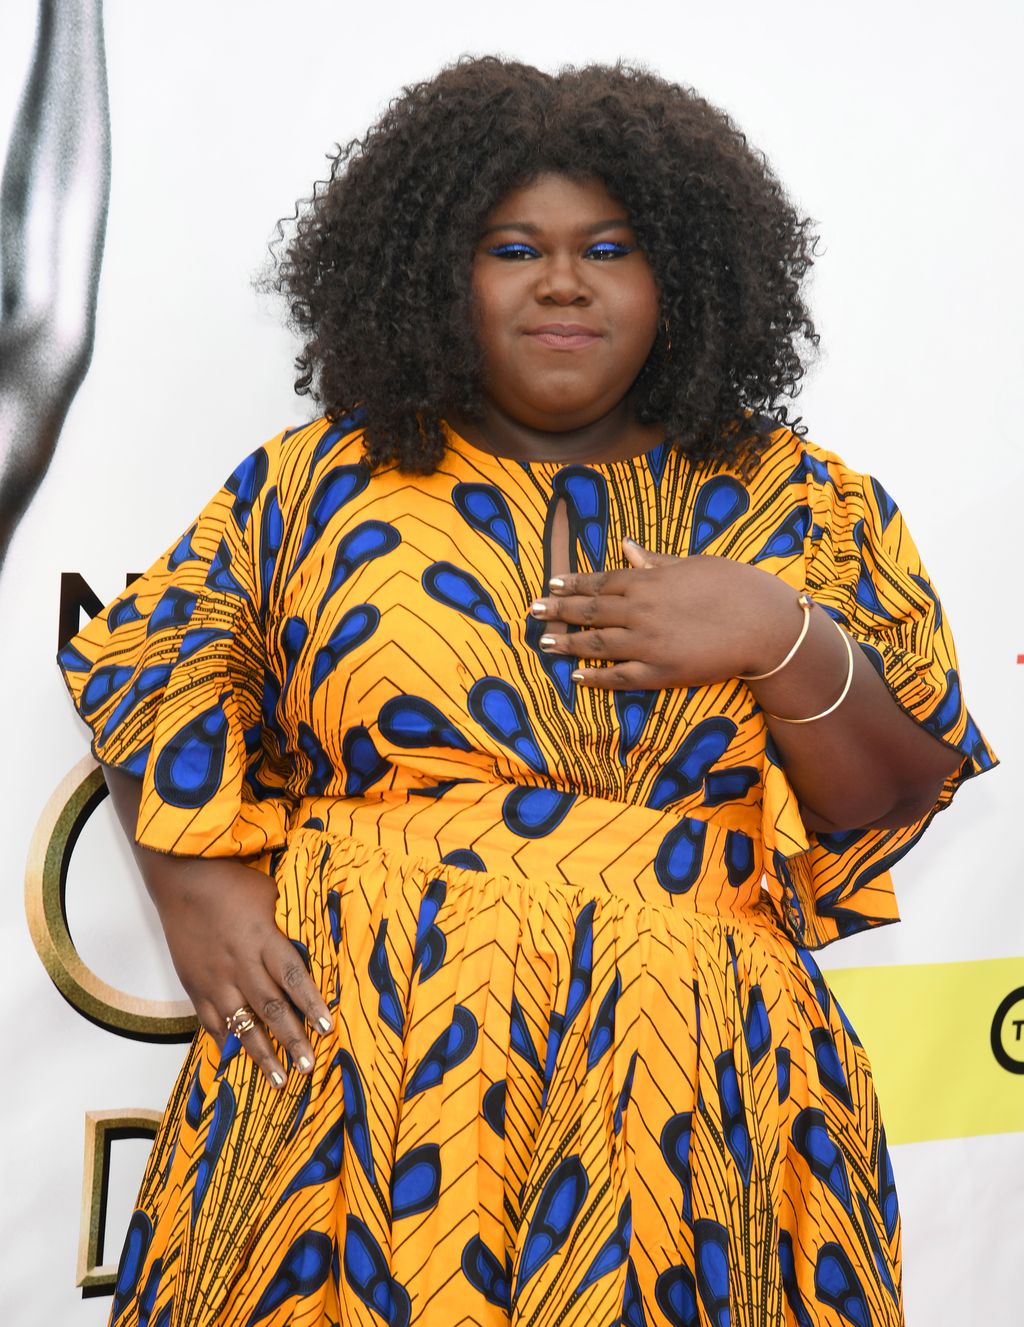 LOS ANGELES, CA - NOVEMBER 14: Actress Gabourey Sidibe attends Glamour Women Of The Year 2016 at NeueHouse Hollywood on November 14, 2016 in Los Angeles, California.  (Photo by Frederick M. Brown/Getty Images)